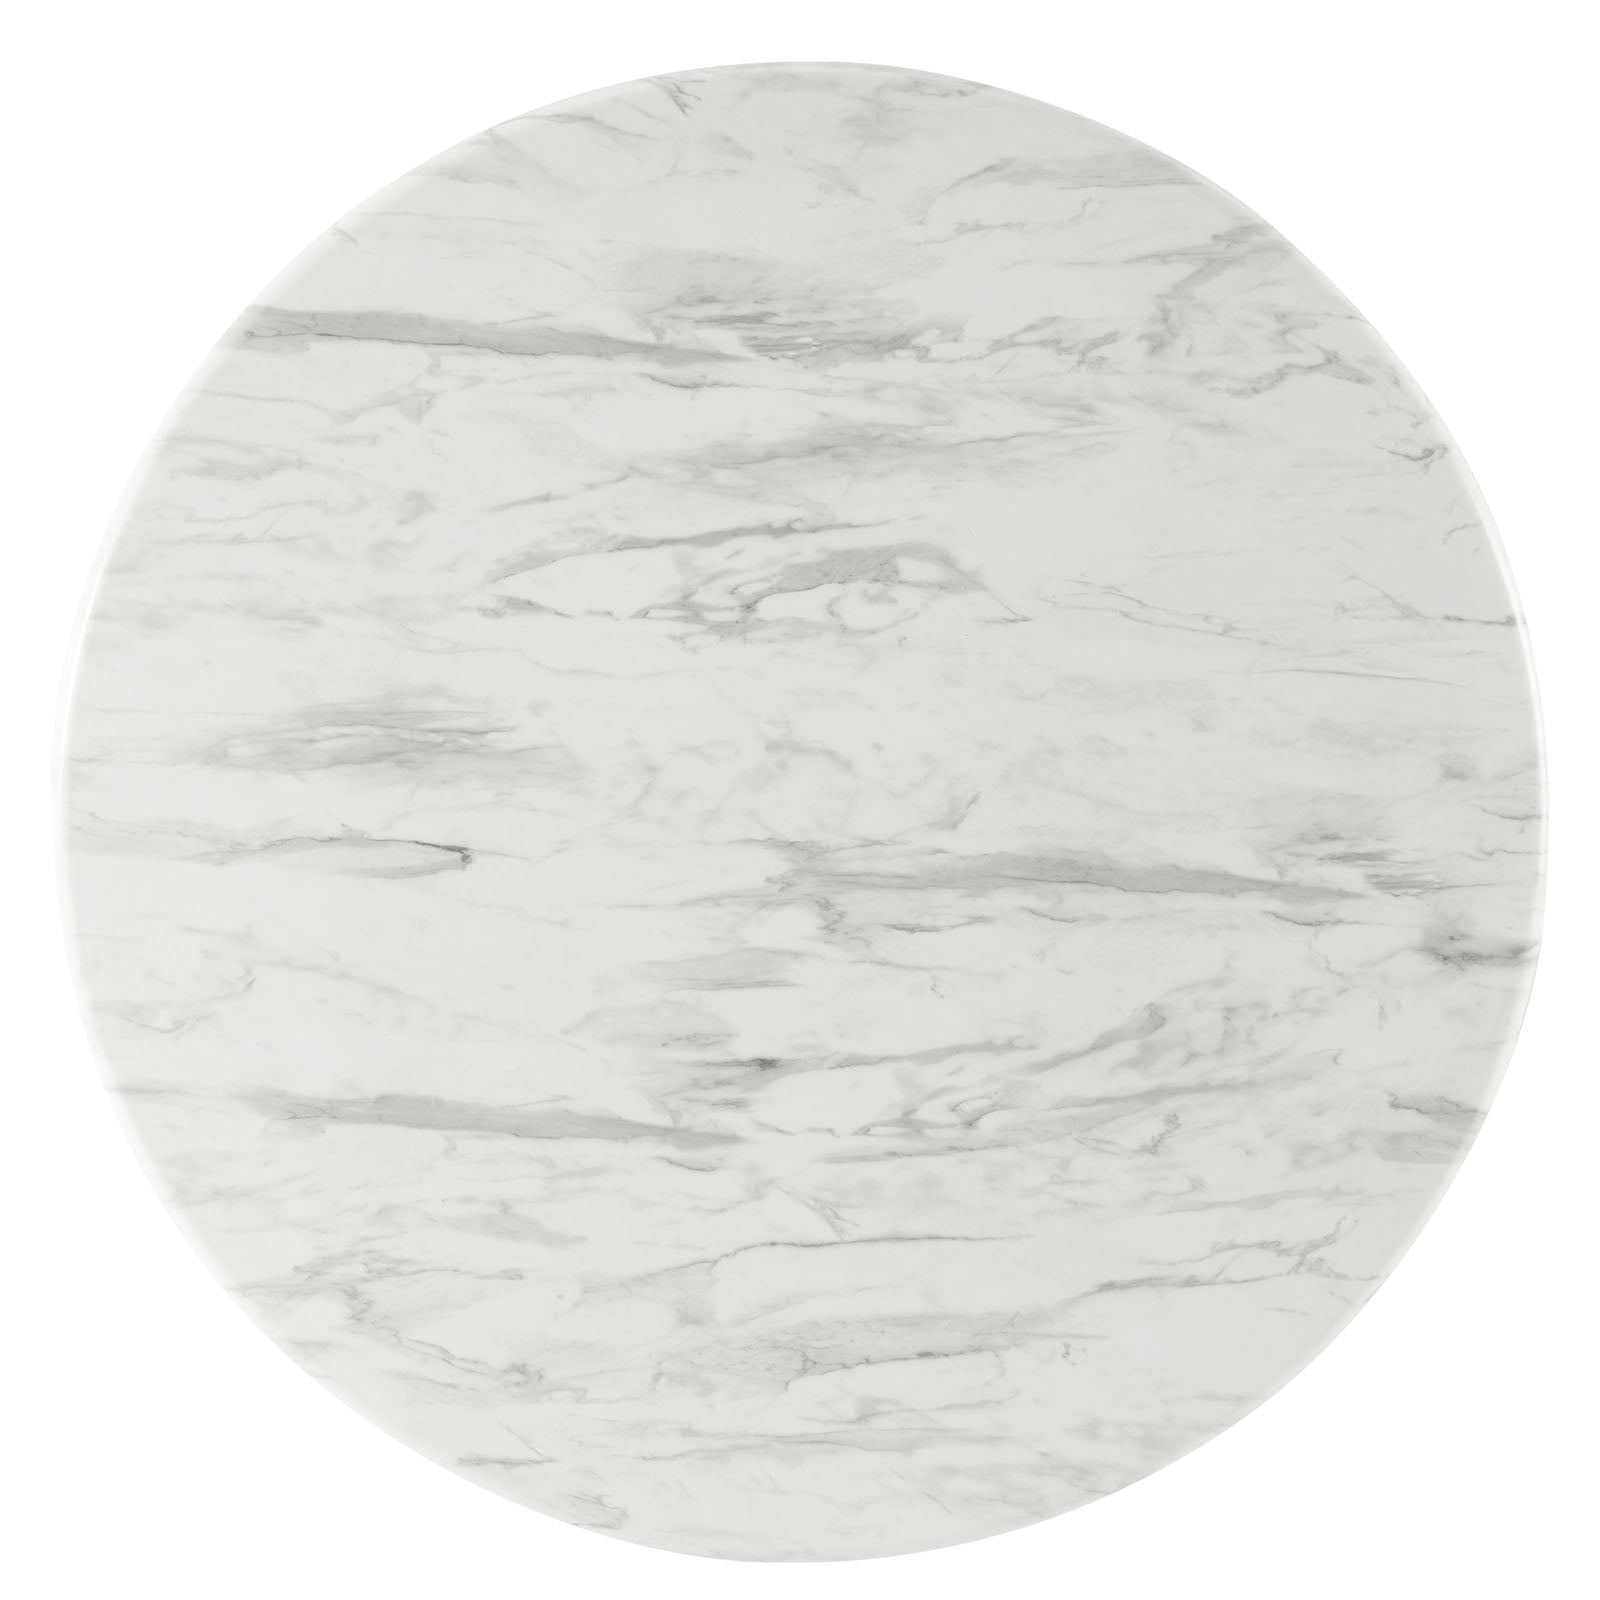 Gallant 50" Round Performance Artificial Marble Dining Table - East Shore Modern Home Furnishings